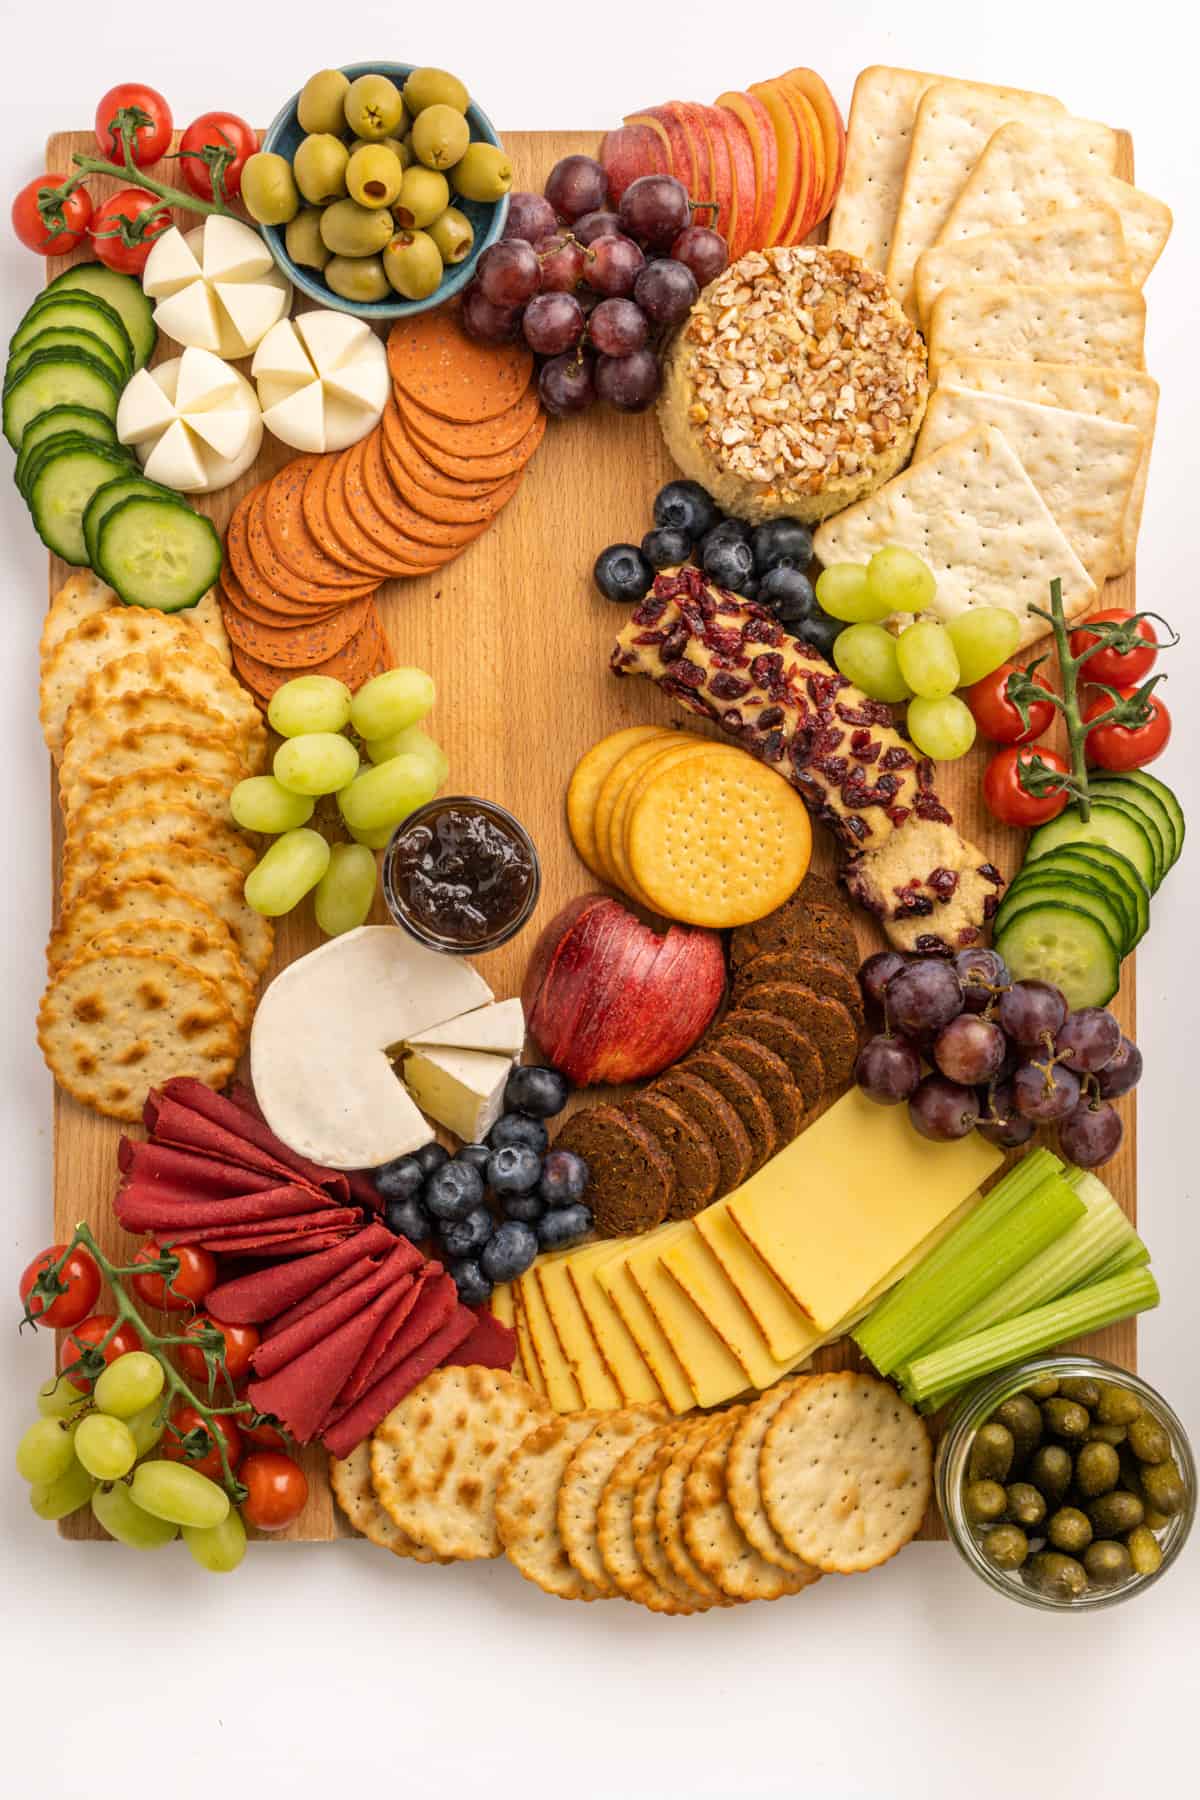 Arranged on a wooden board, various types of crackers, vegan cheeses, ready-to-eat vegan deli slices, fresh fruit and vegetables, olives, pickles and chutney.